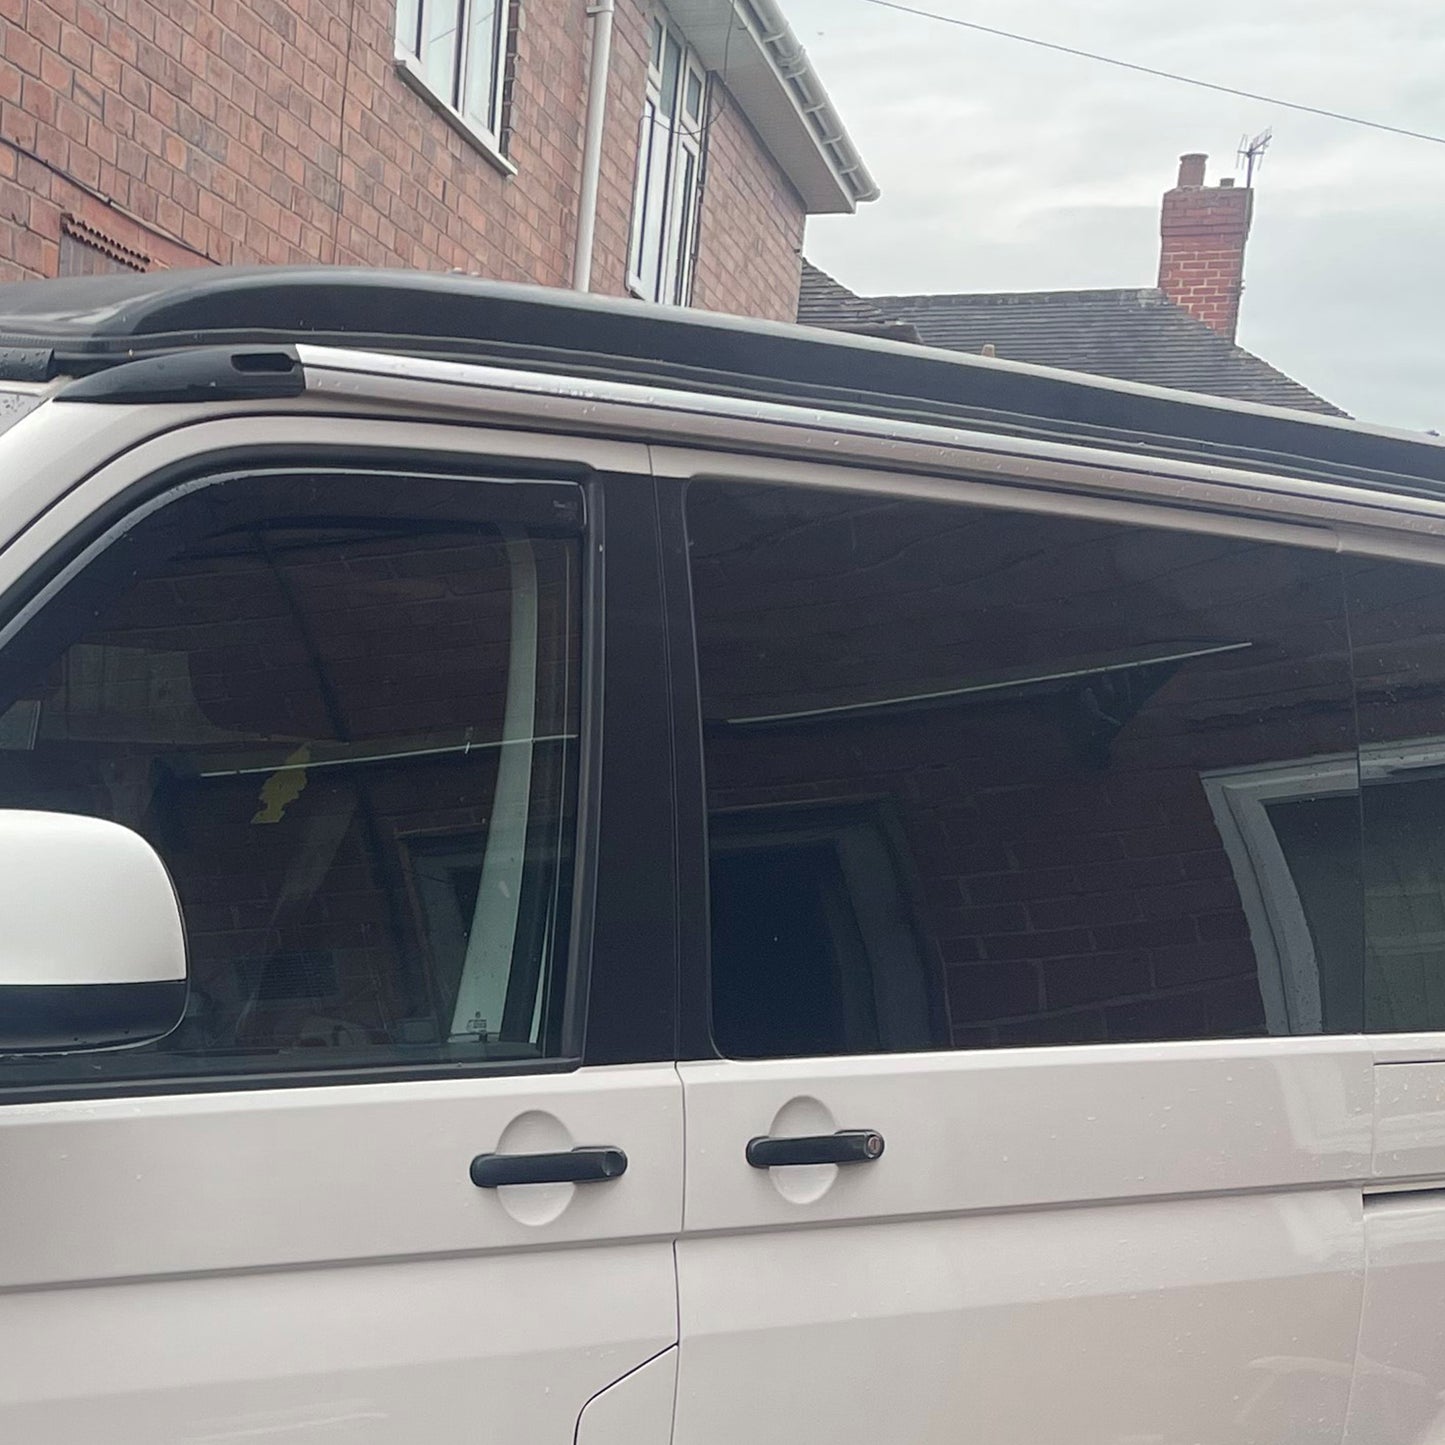 VW T6 Awning Rails (Anodised Silver) Ideal for Campervan Drive-Through Awning, Compatible with Reimo Awning